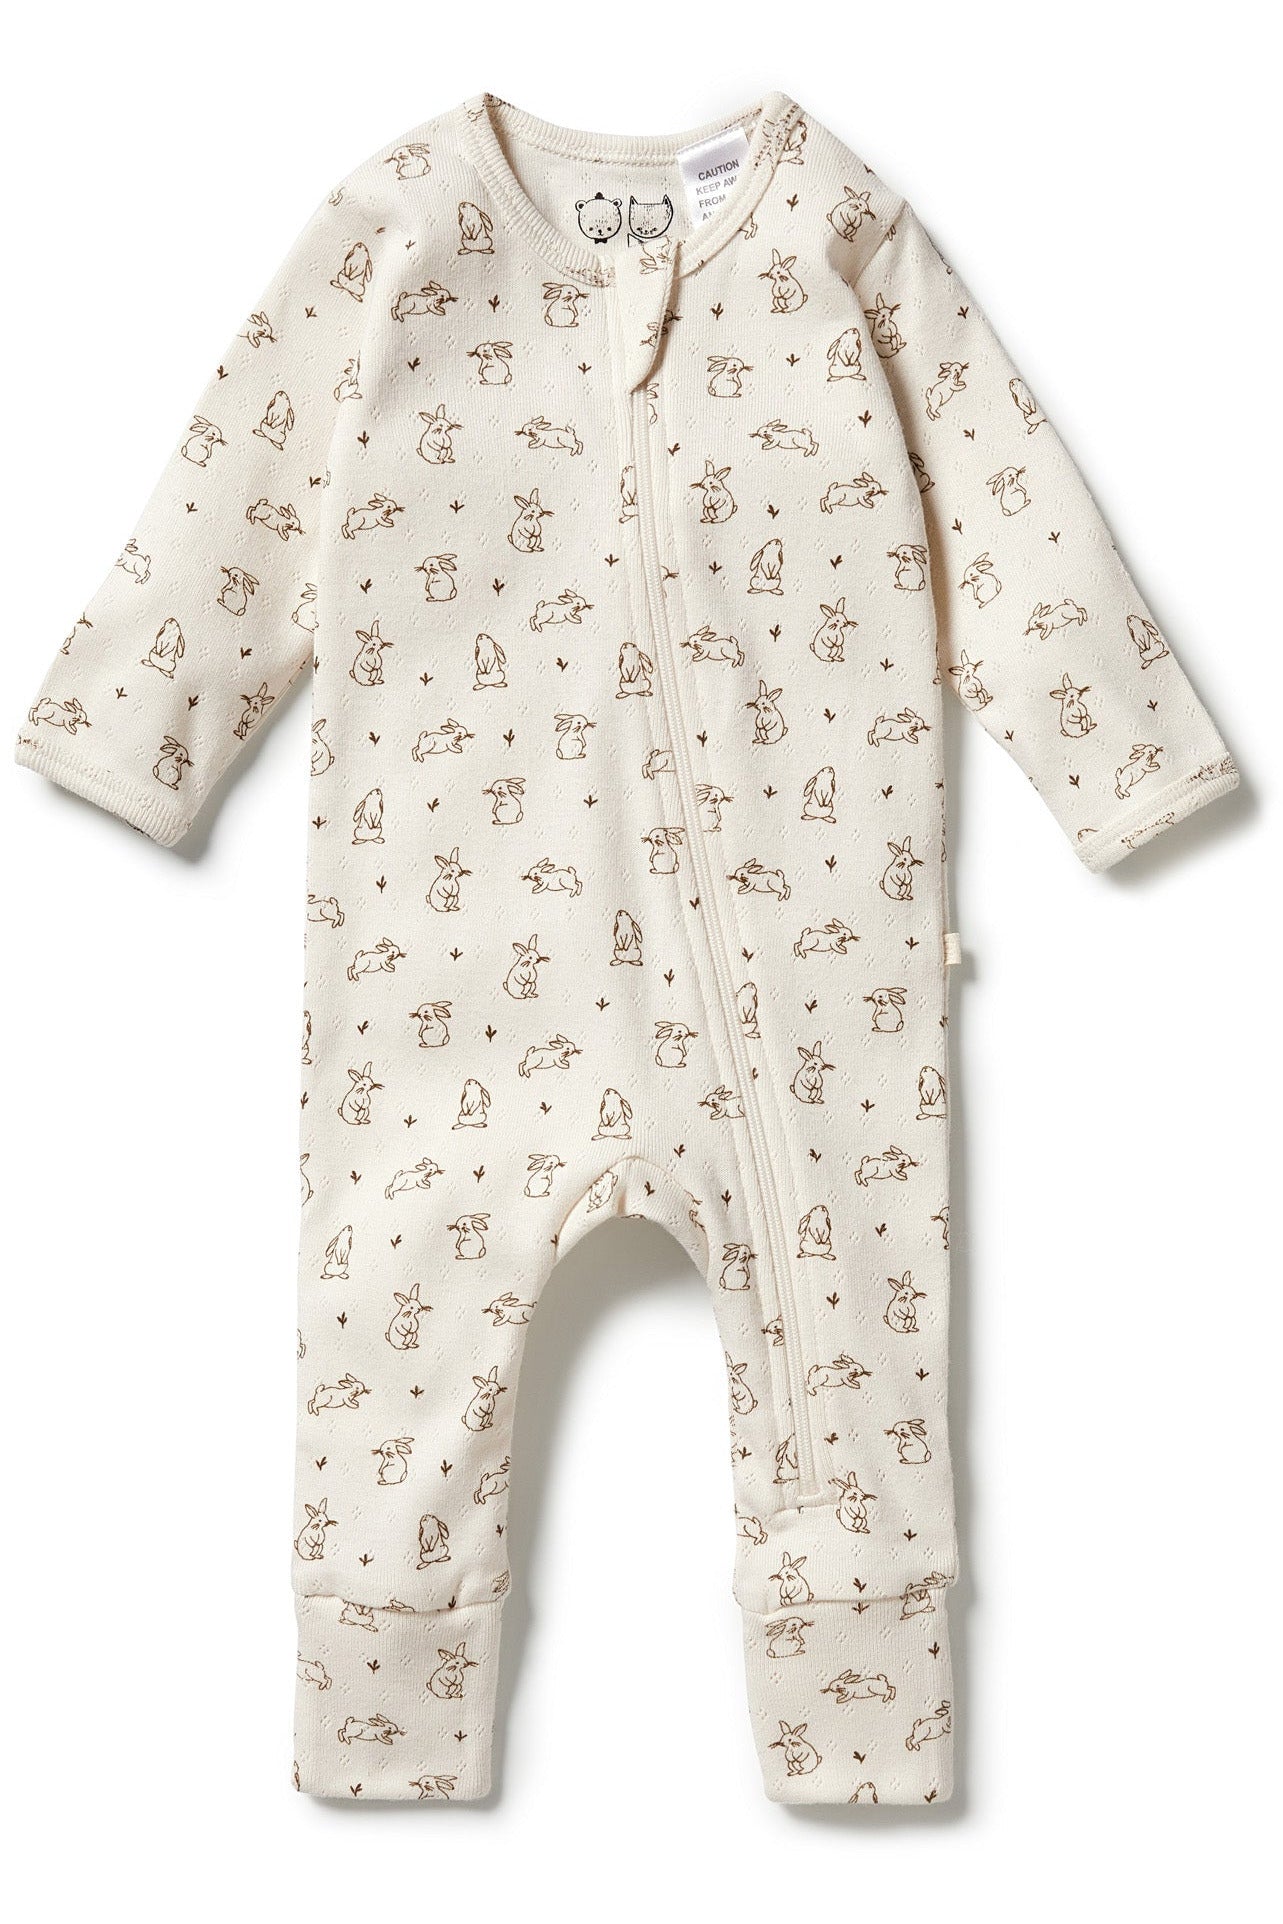 Organic Pointelle Zipsuit with Feet - Bunny Love